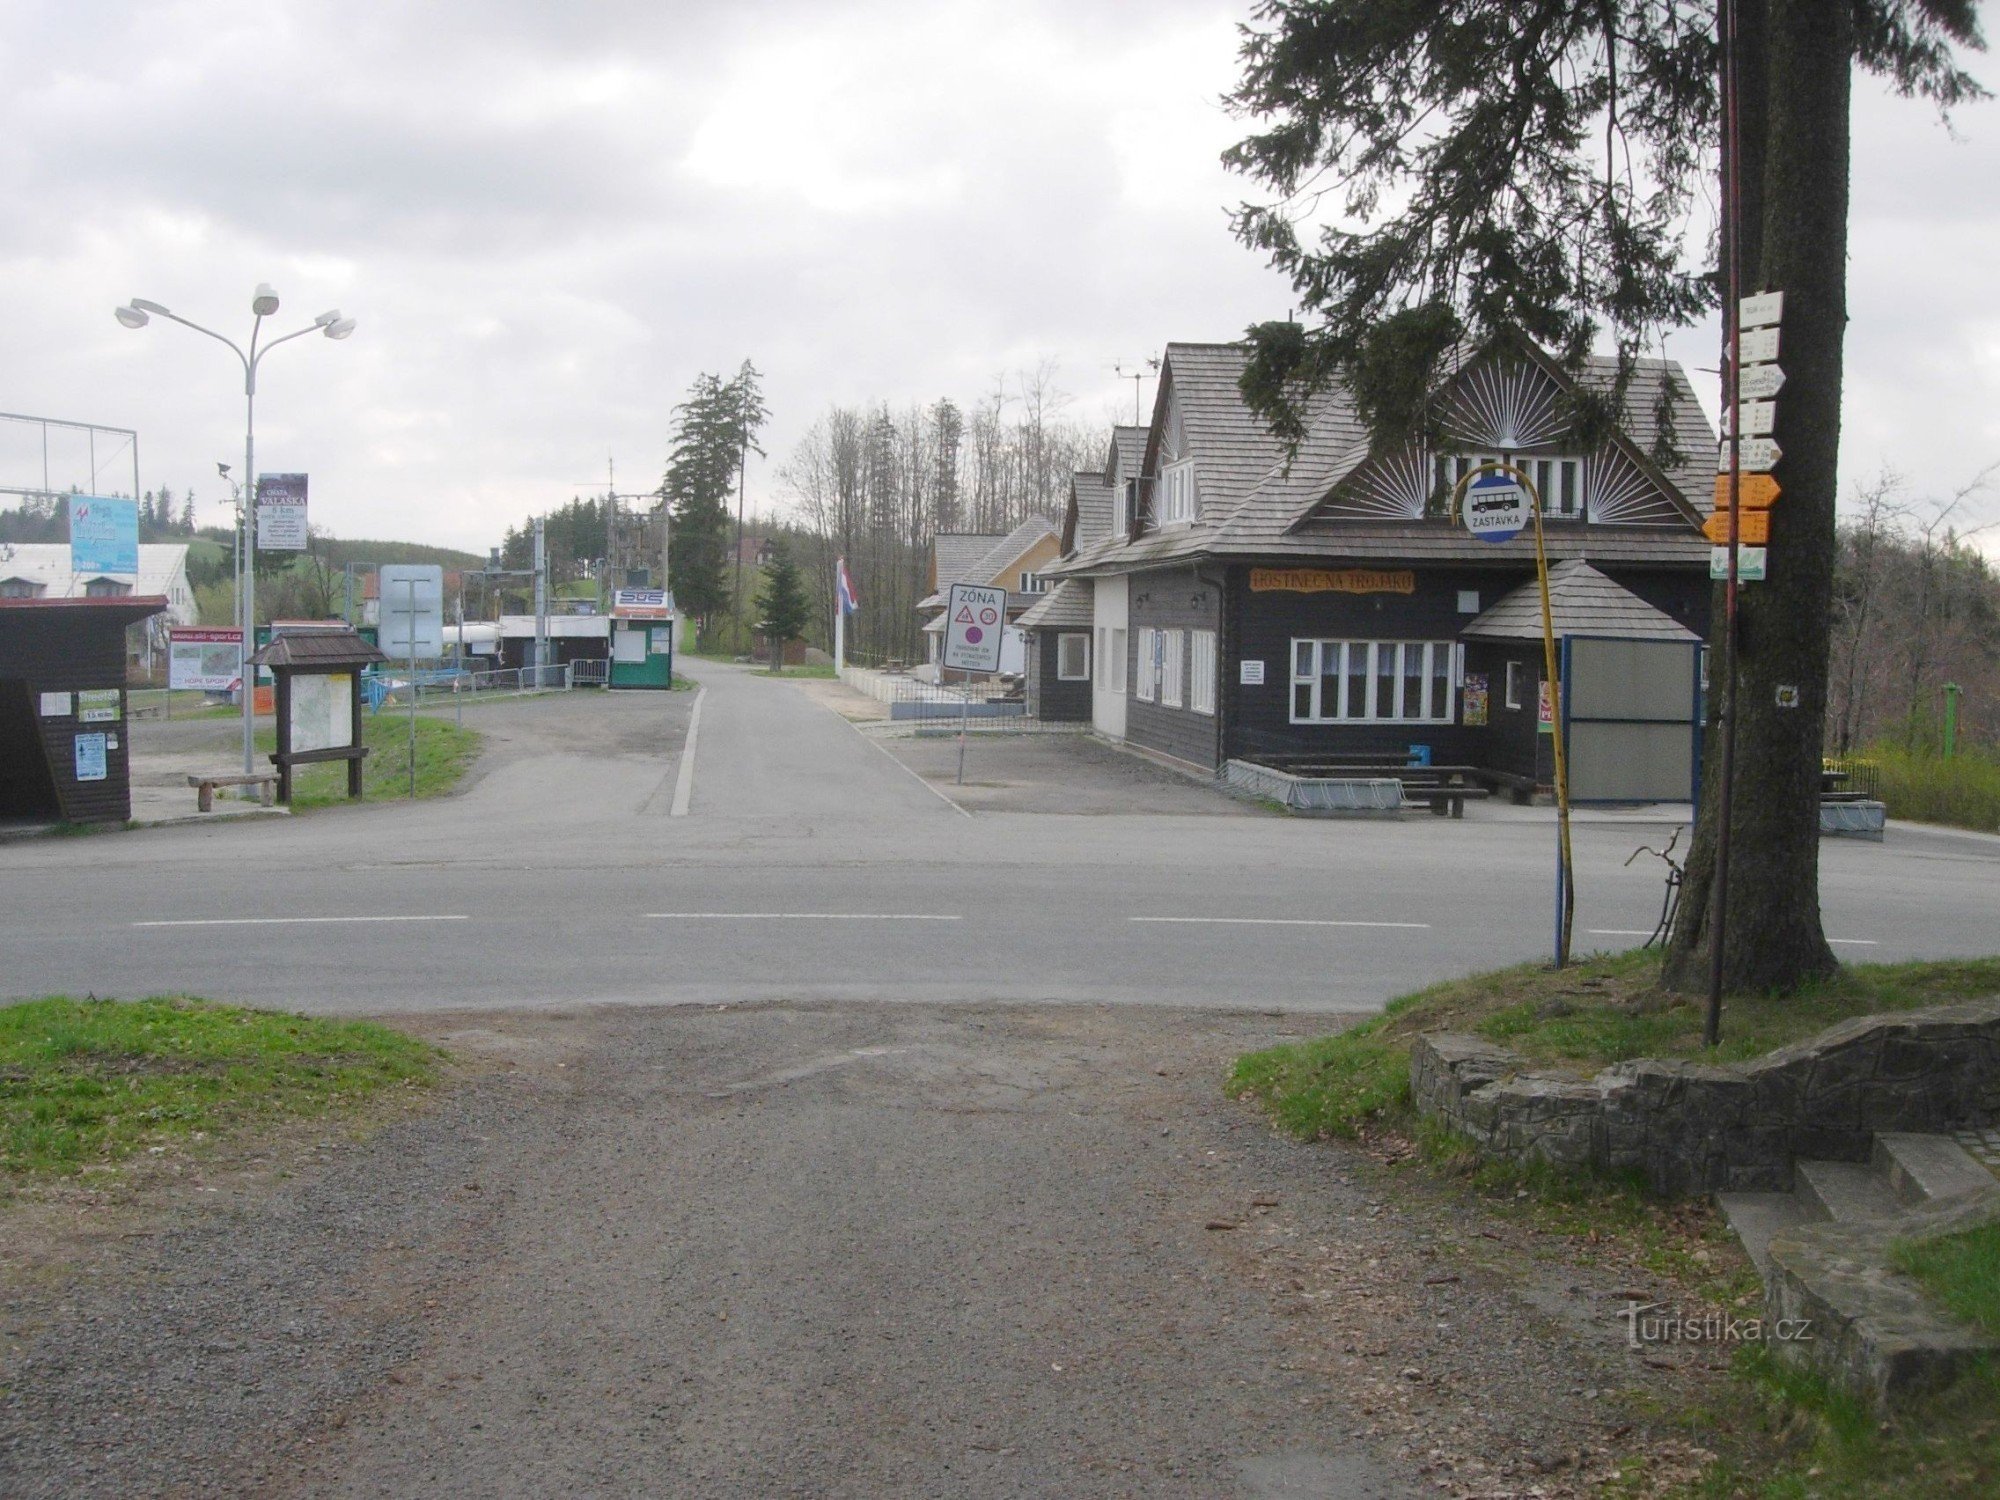 A three-way junction with an inn, a bus stop, a ski resort and a signpost